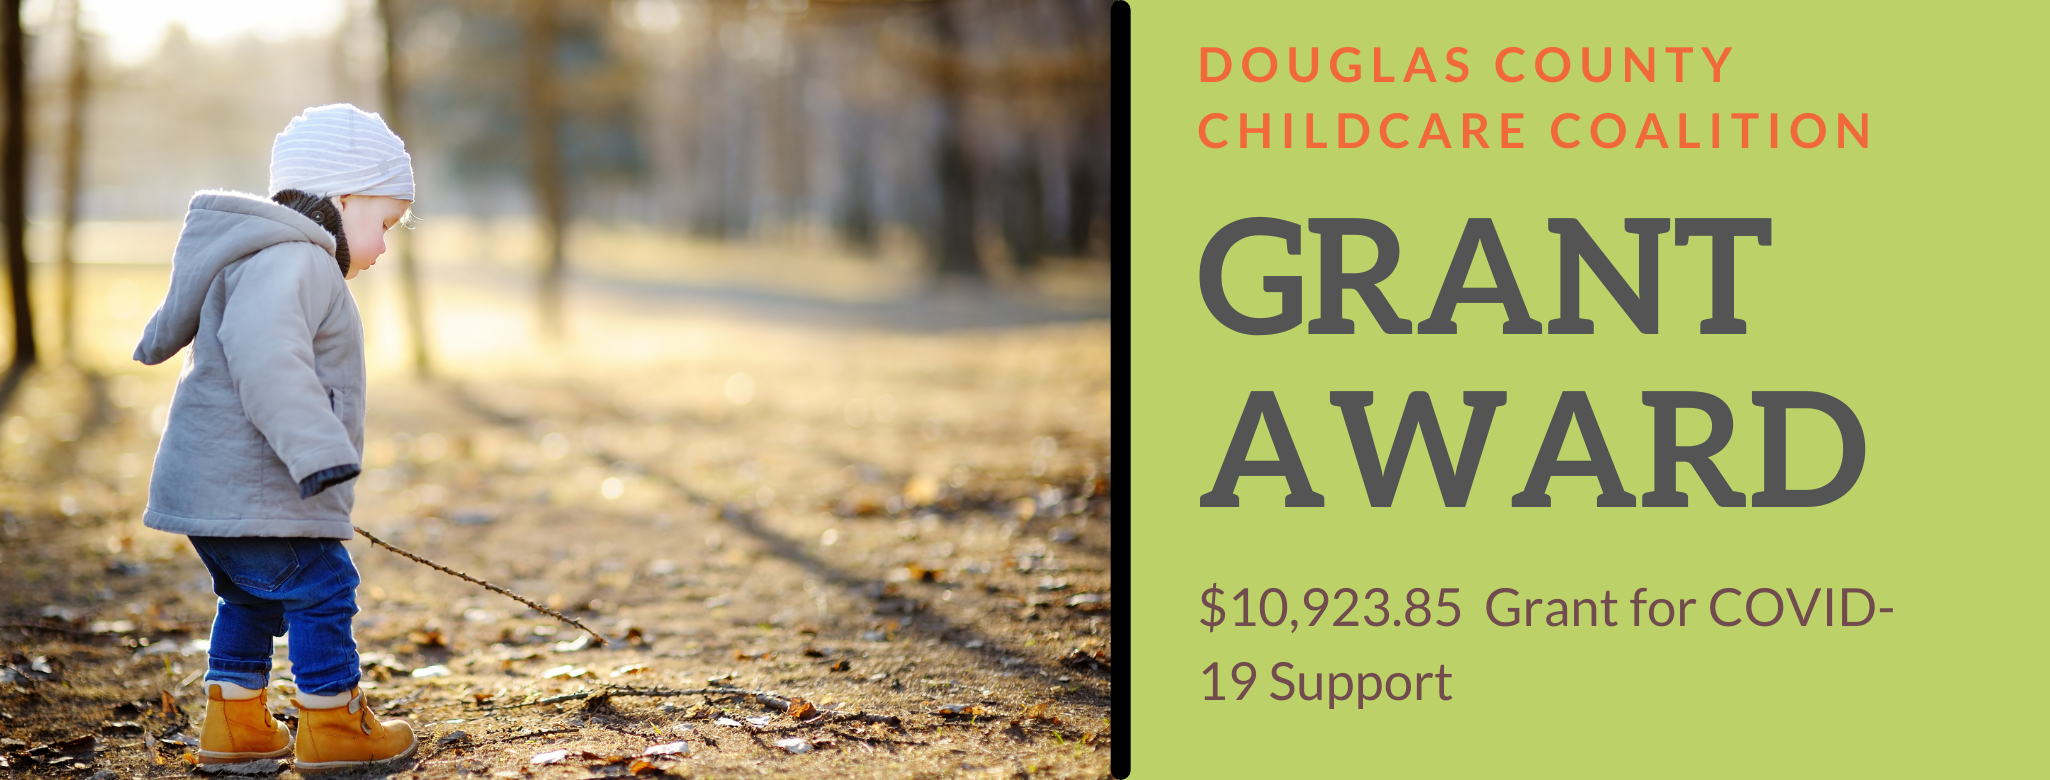 FOR IMMEDIATE RELEASE For more information, contact: Jessica Gaul Executive Director 541-957-1008 Jessicag@cobbschool.org COBB CHILDREN’S LEARNING CENTER RECEIVES $10,923.85 GRANT FOR COVID-19 SUPPORT Roseburg, Oregon (01.21.21) — Cobb Children’s Learning Center has received a $10,923.85 grant from the Douglas County Childcare Coalition to support high-quality care at its Cobb Childcare and Preschool location while operating […]